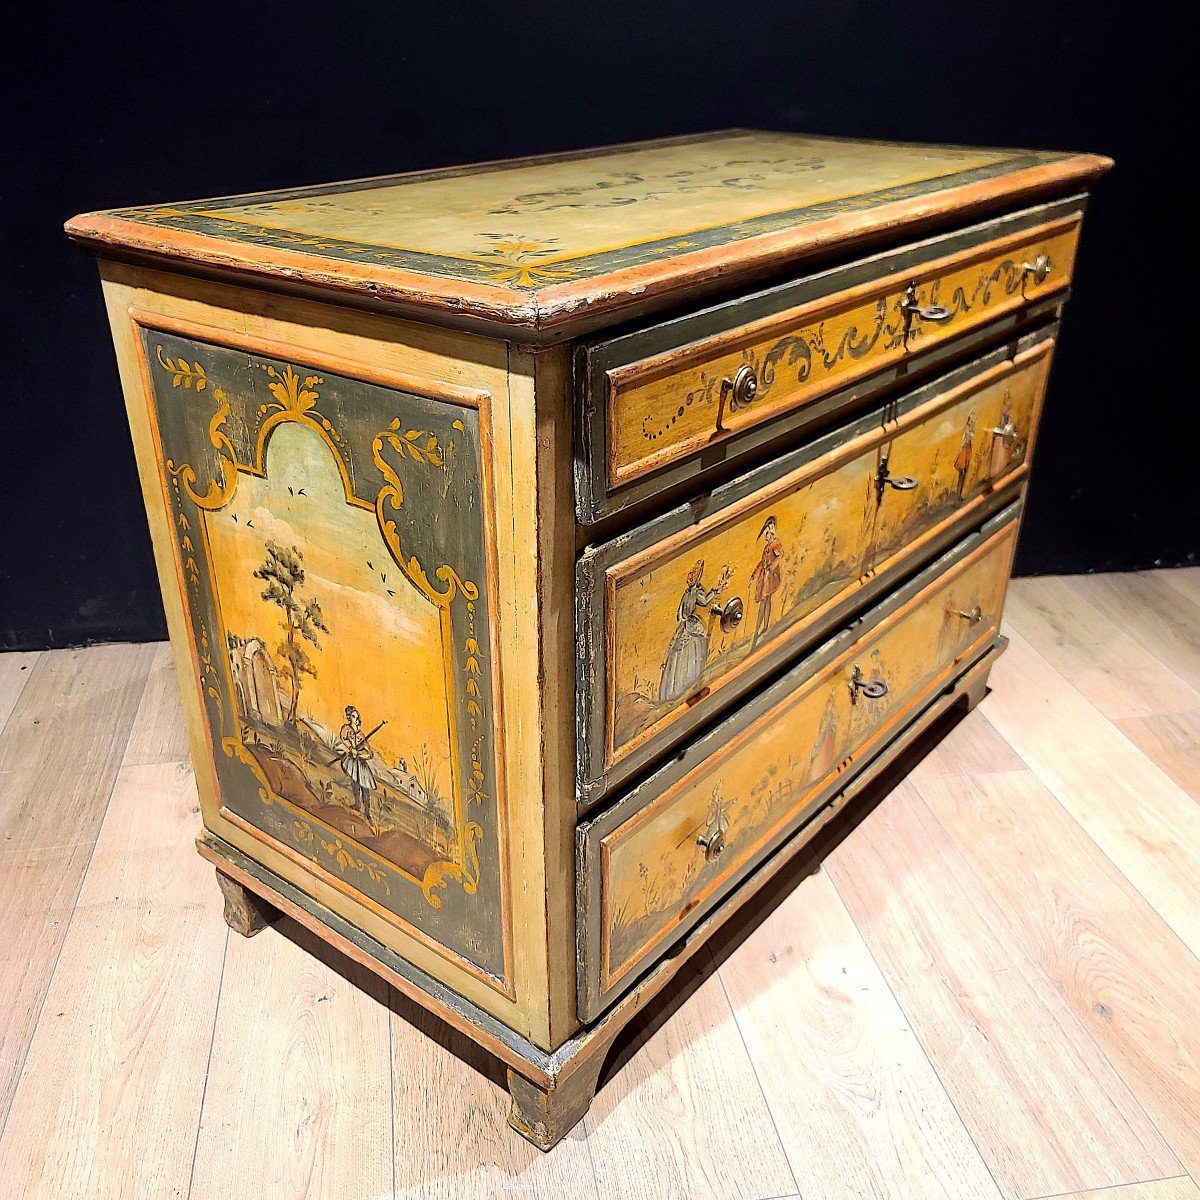 Painted Wooden Commode Decorated With Scenes Of Characters, 18th Century (116cm X 84cm X 60cm)-photo-7